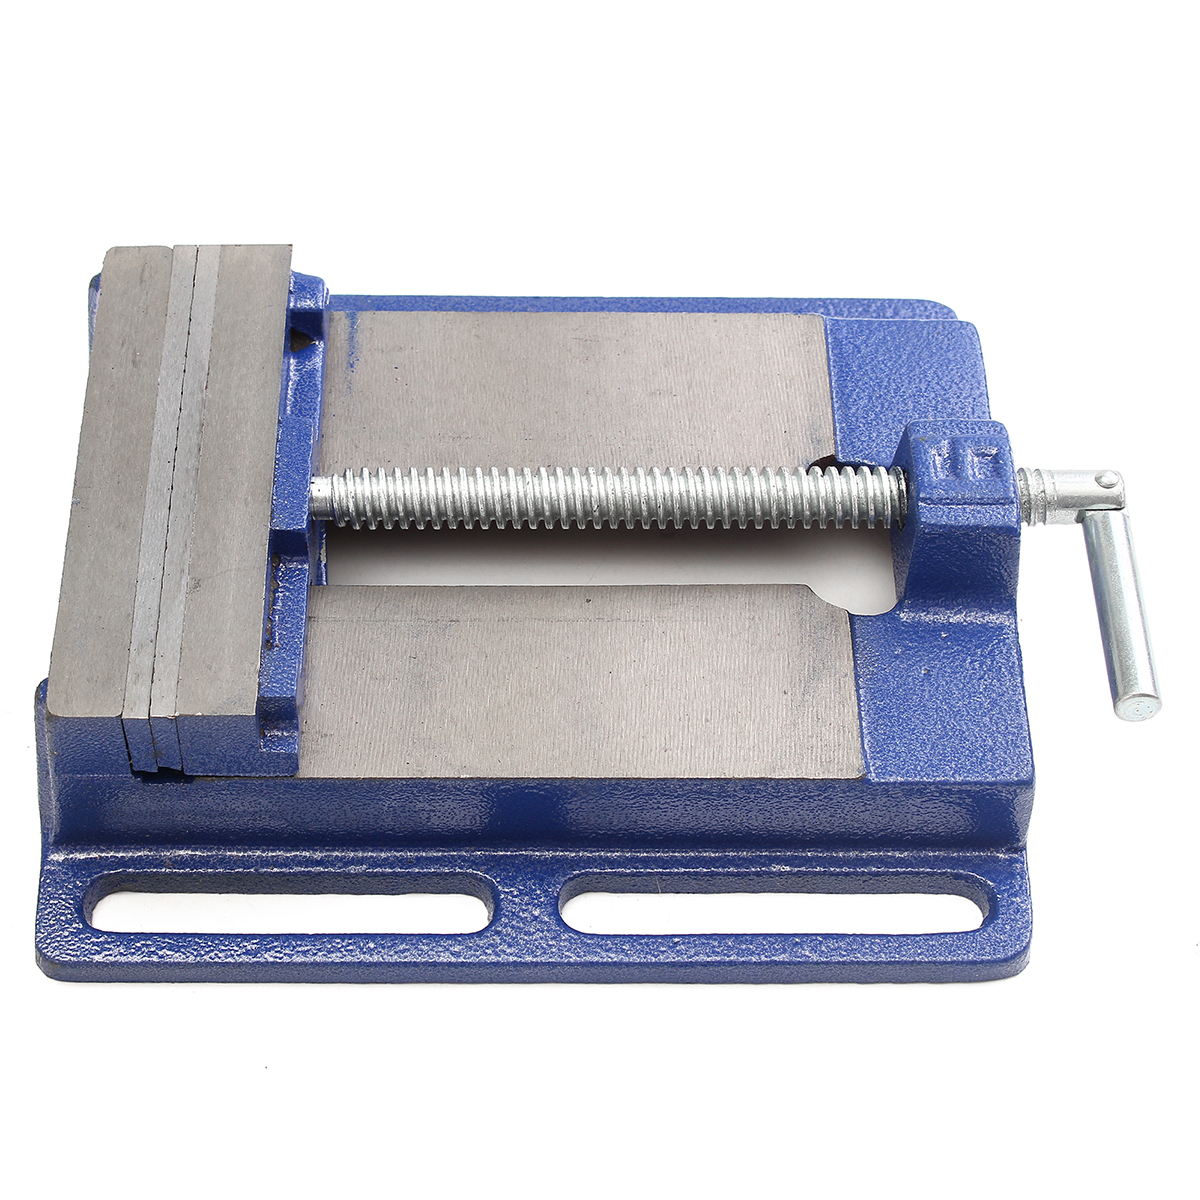 Find 6 Inch Heavy Duty JAW Drill Press Vice Bench Clamp Woodworking Drilling for Sale on Gipsybee.com with cryptocurrencies